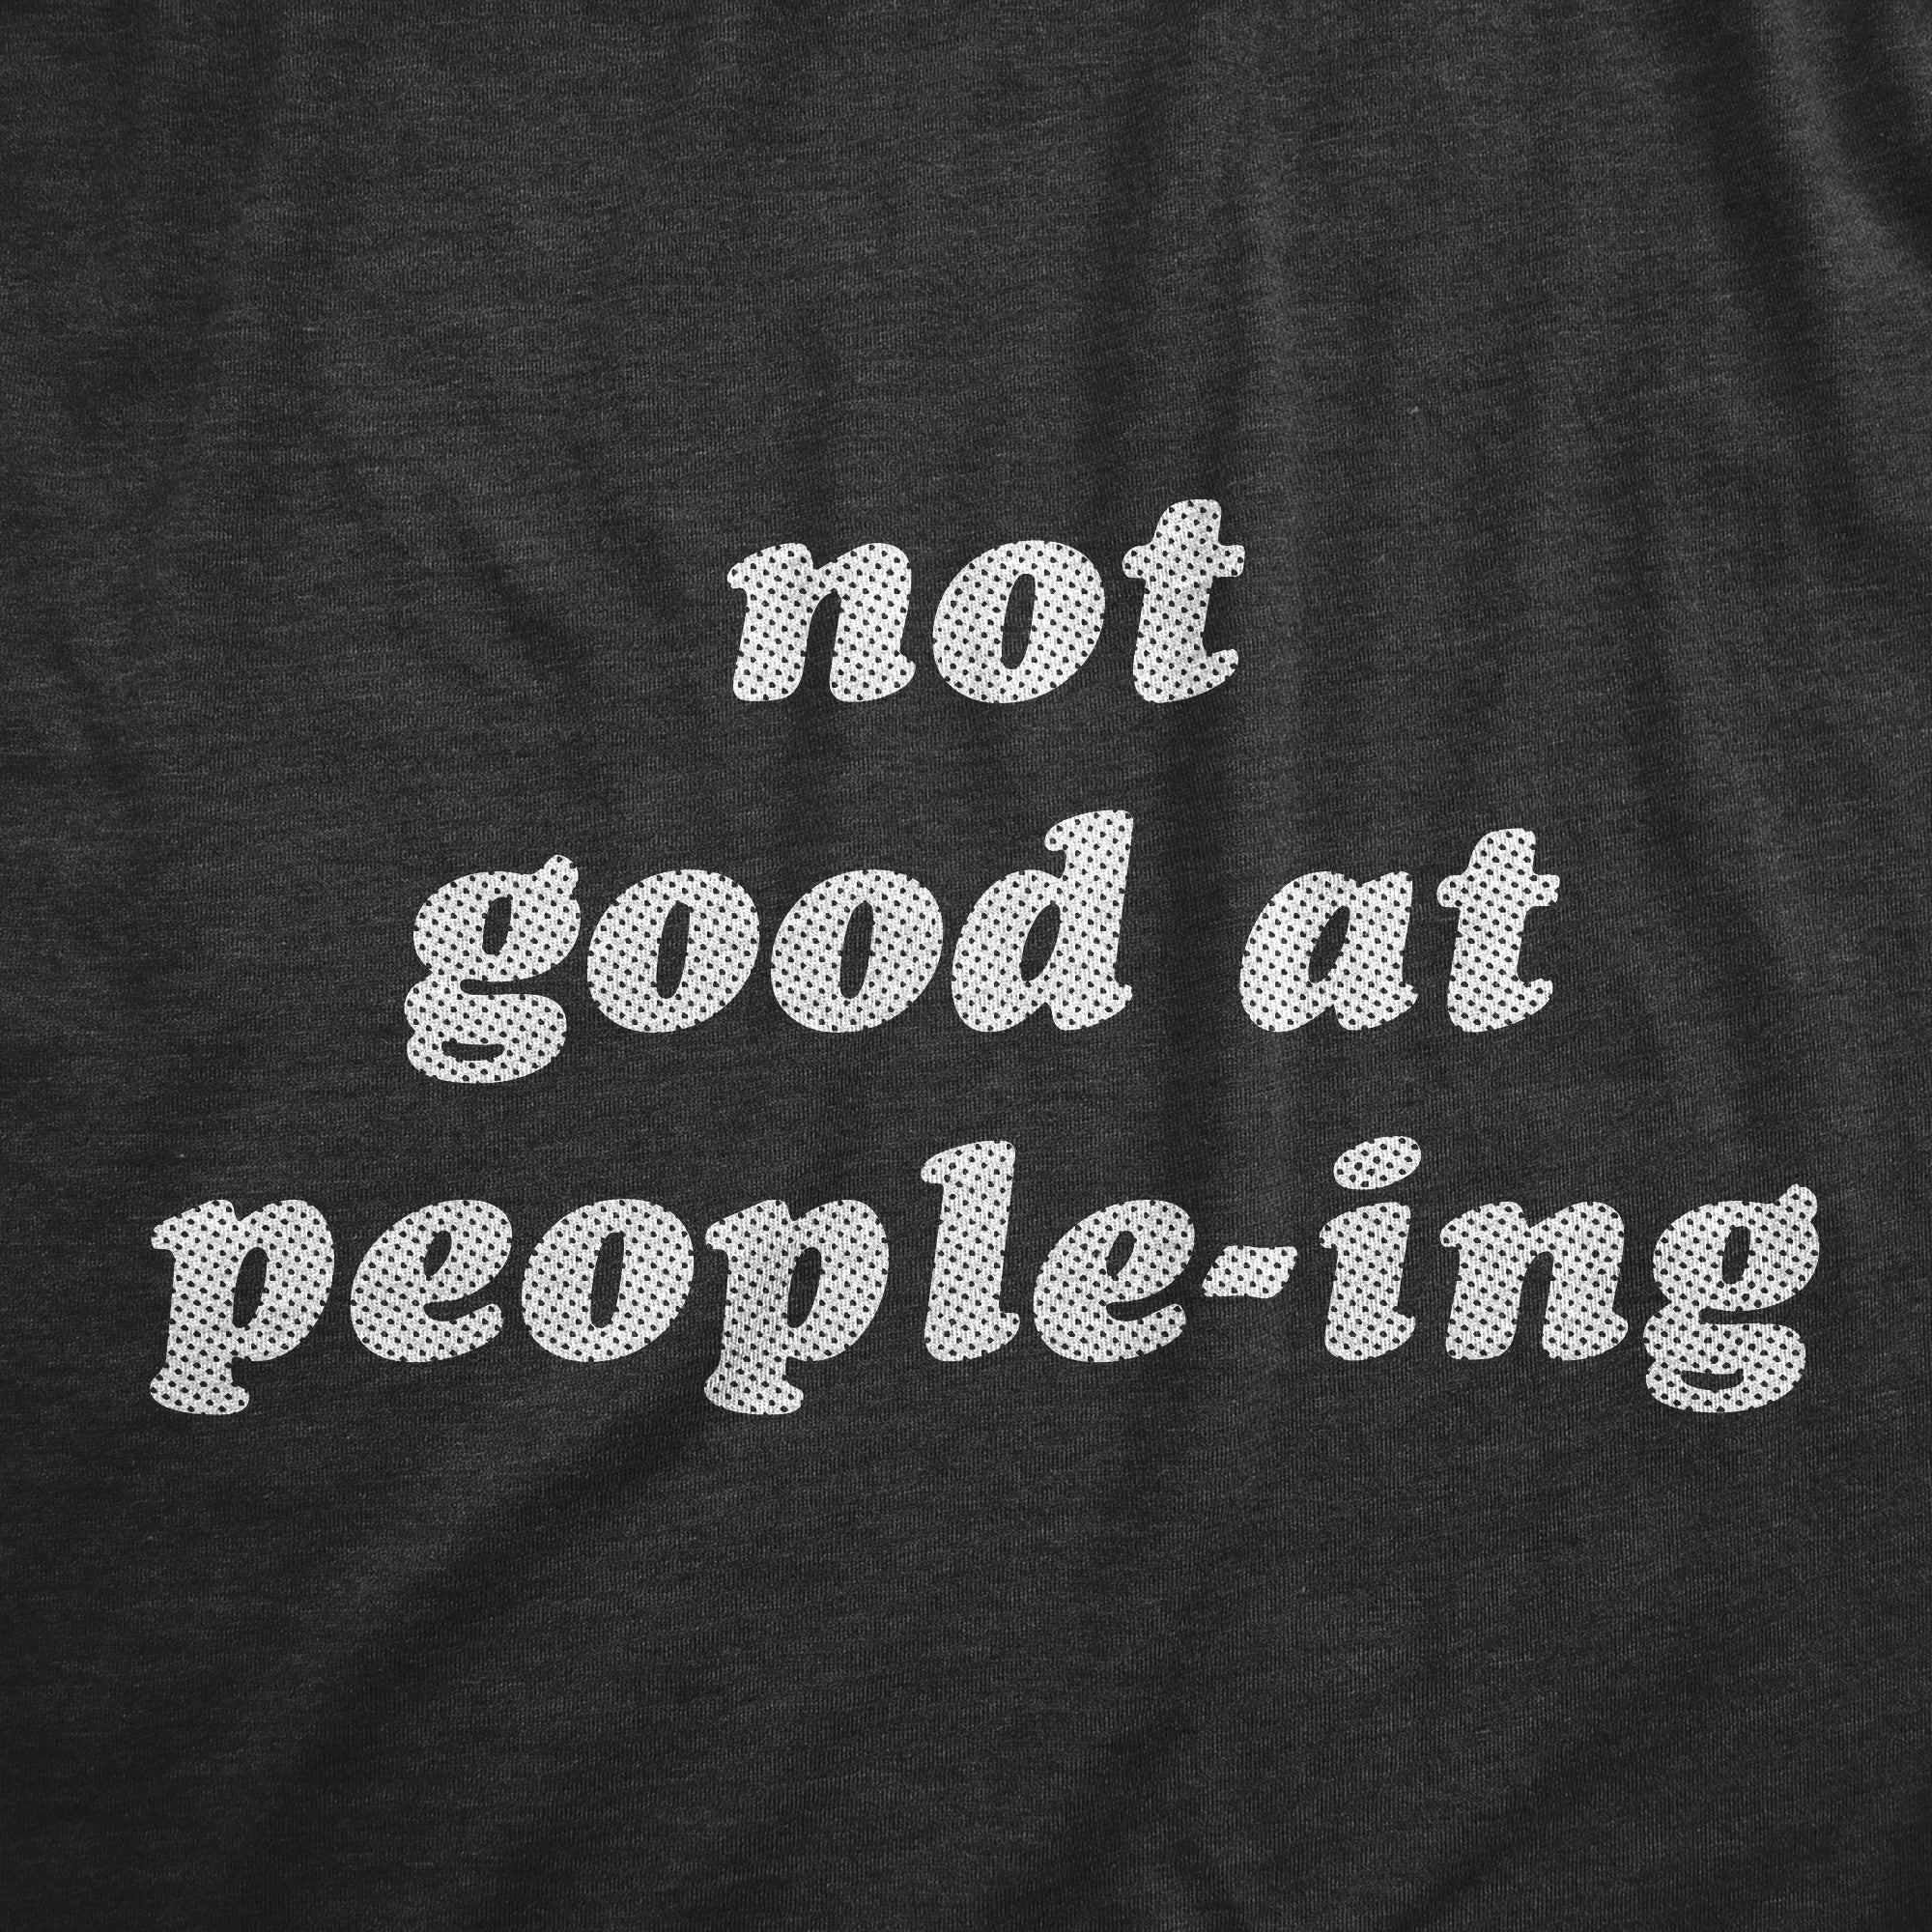 Funny Heather Black - PEOPLEING Not Good At Peopleing Womens T Shirt Nerdy Introvert Tee